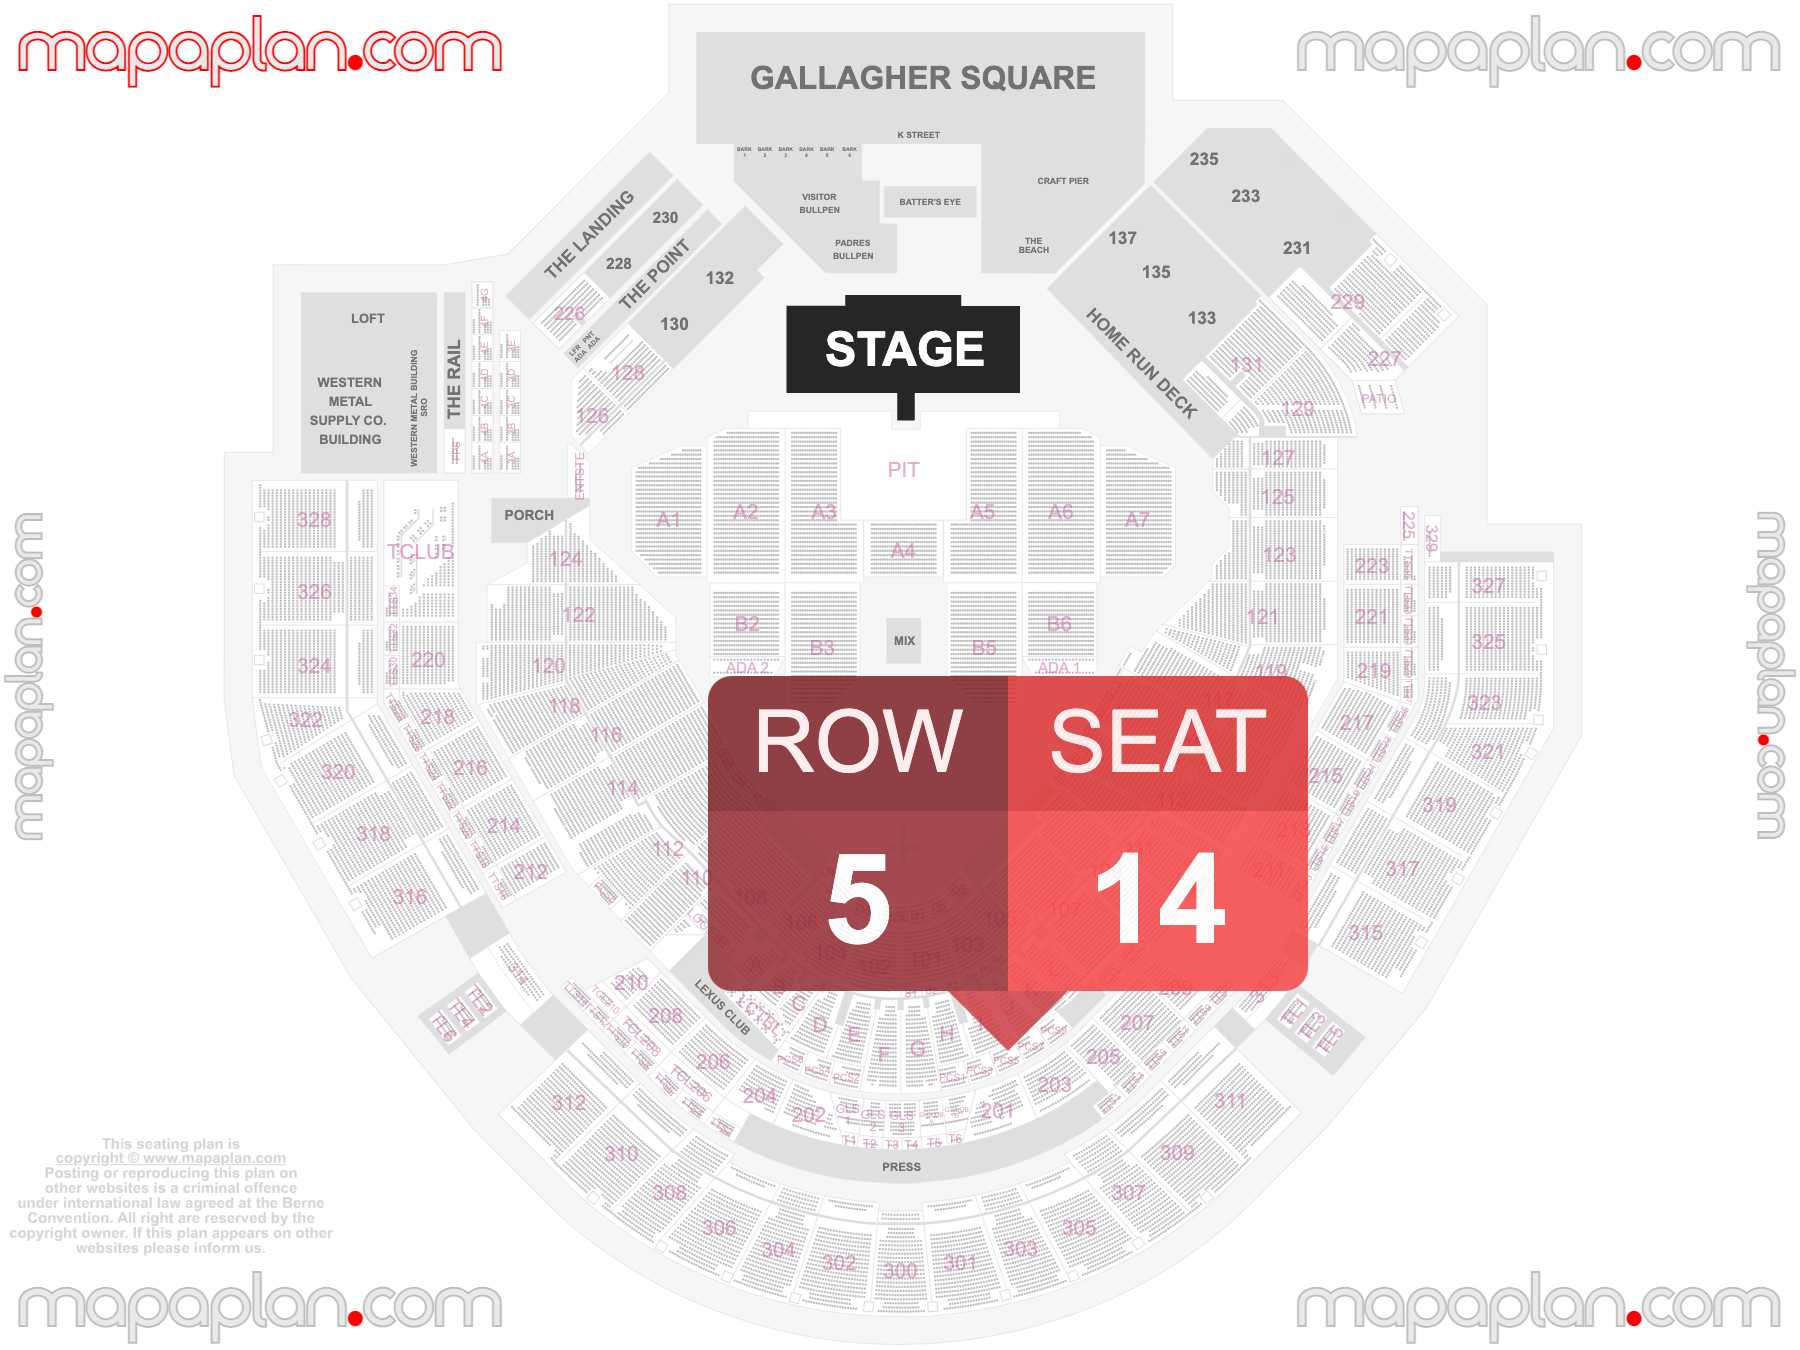 San Diego Petco Park seating chart Concert with floor PIT general admission standing room only seating chart with exact section numbers showing best rows and seats selection 3d layout - Best interactive seat finder tool with precise detailed location data